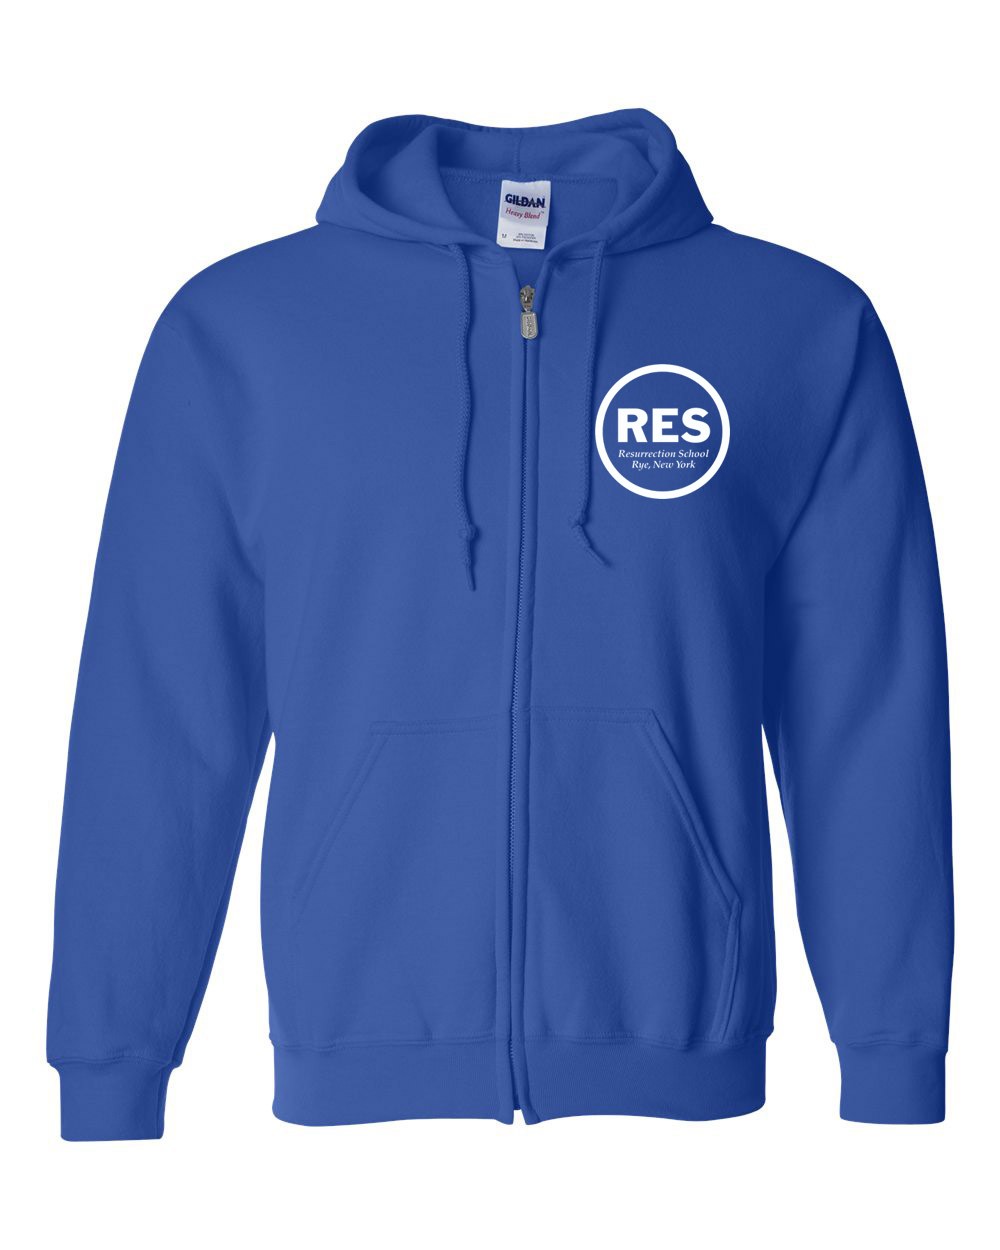 Resurrection Spirit Zip Hoodie w/ White Logo - Please Allow 2-3 Weeks for Delivery